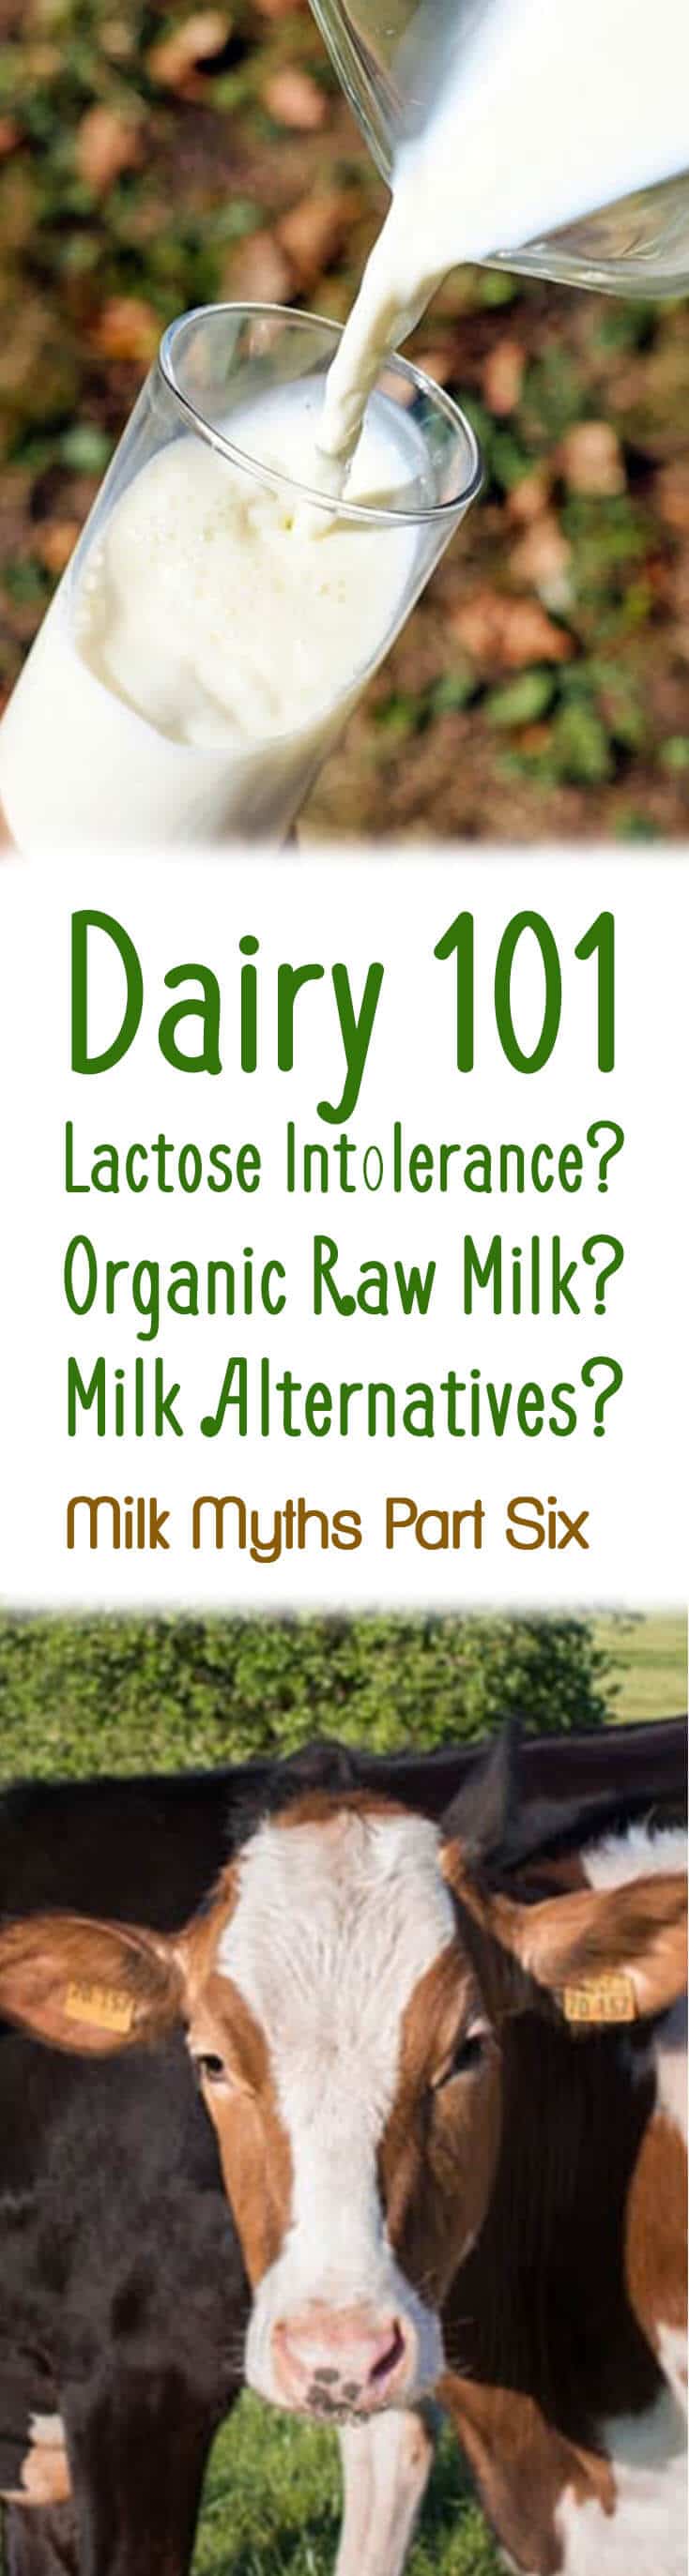 A pinterest image of milk and a cow with the overlay text \"Dairy 101 Lactose Intolerance? Organic Raw Milk? Milk Alternatives? Milk Myths Part Six.\"